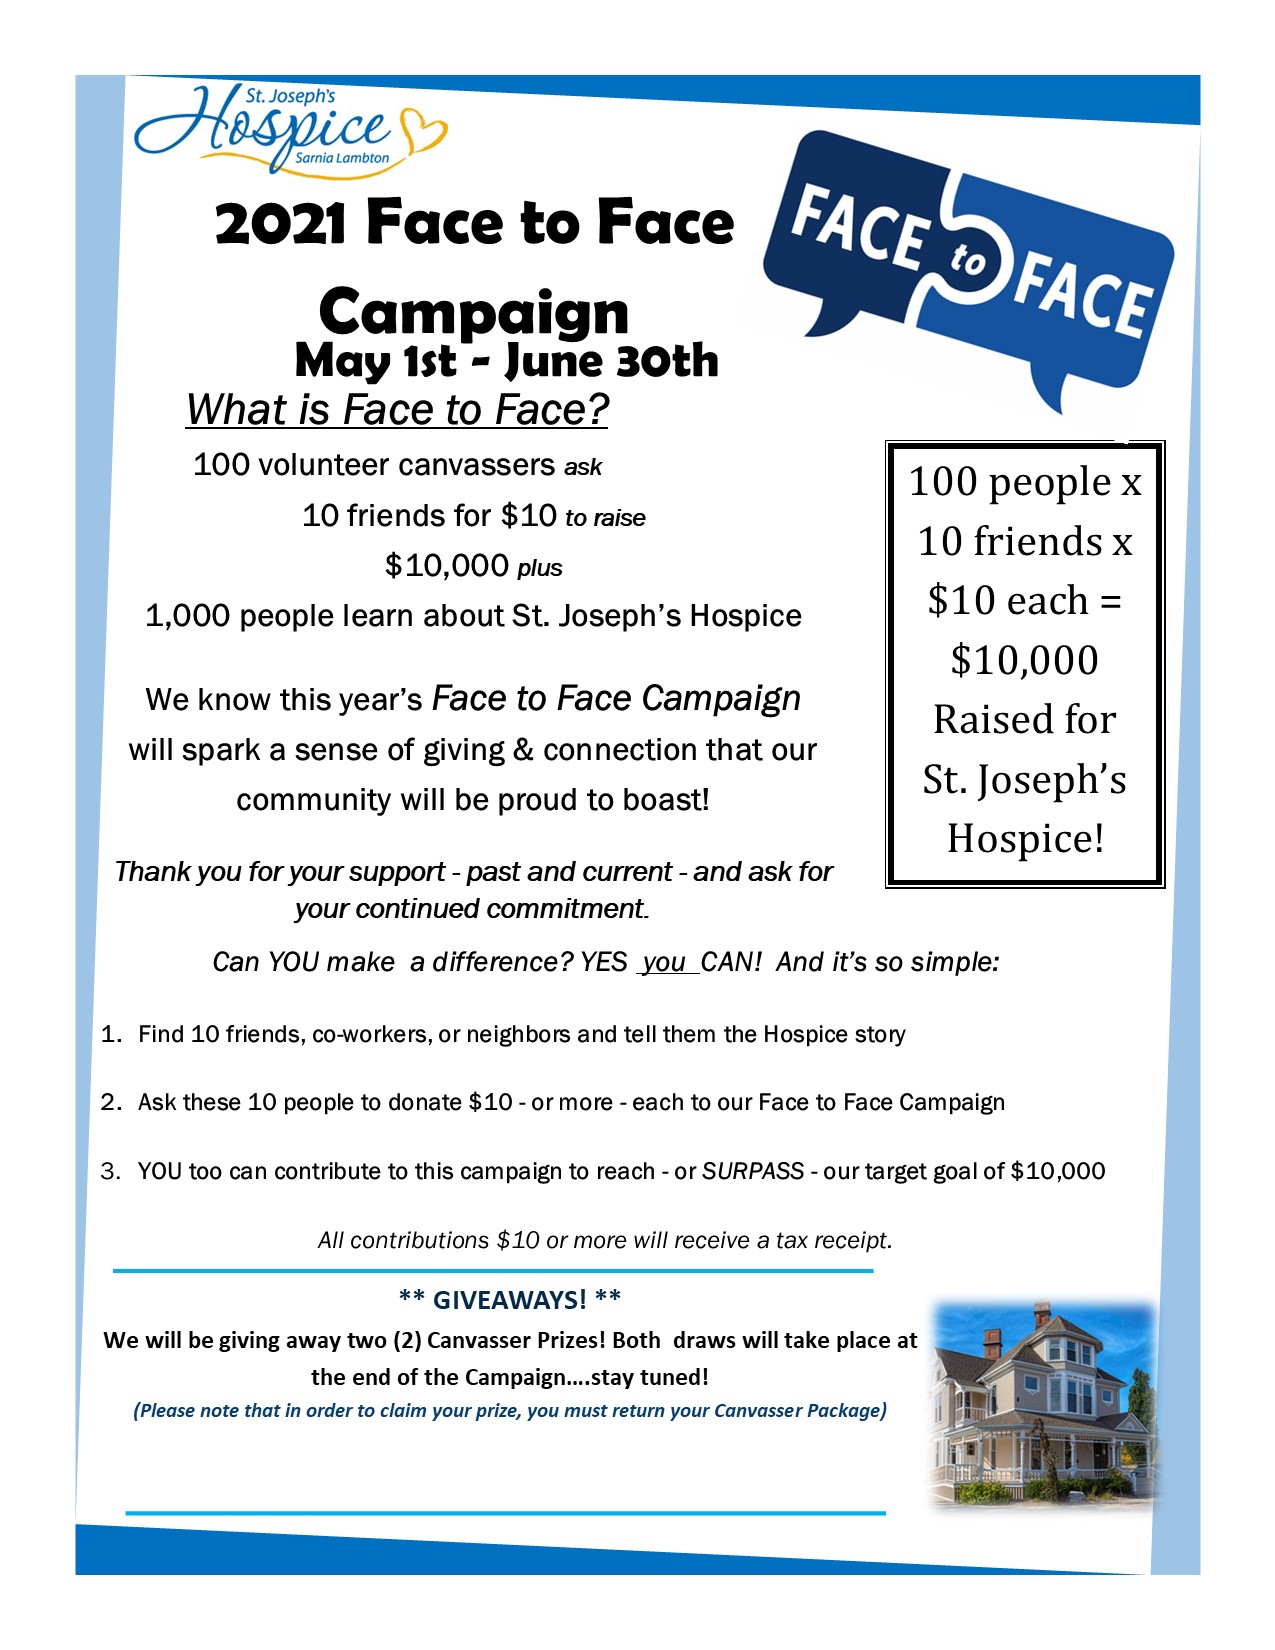 Face to Face Campaign 2021